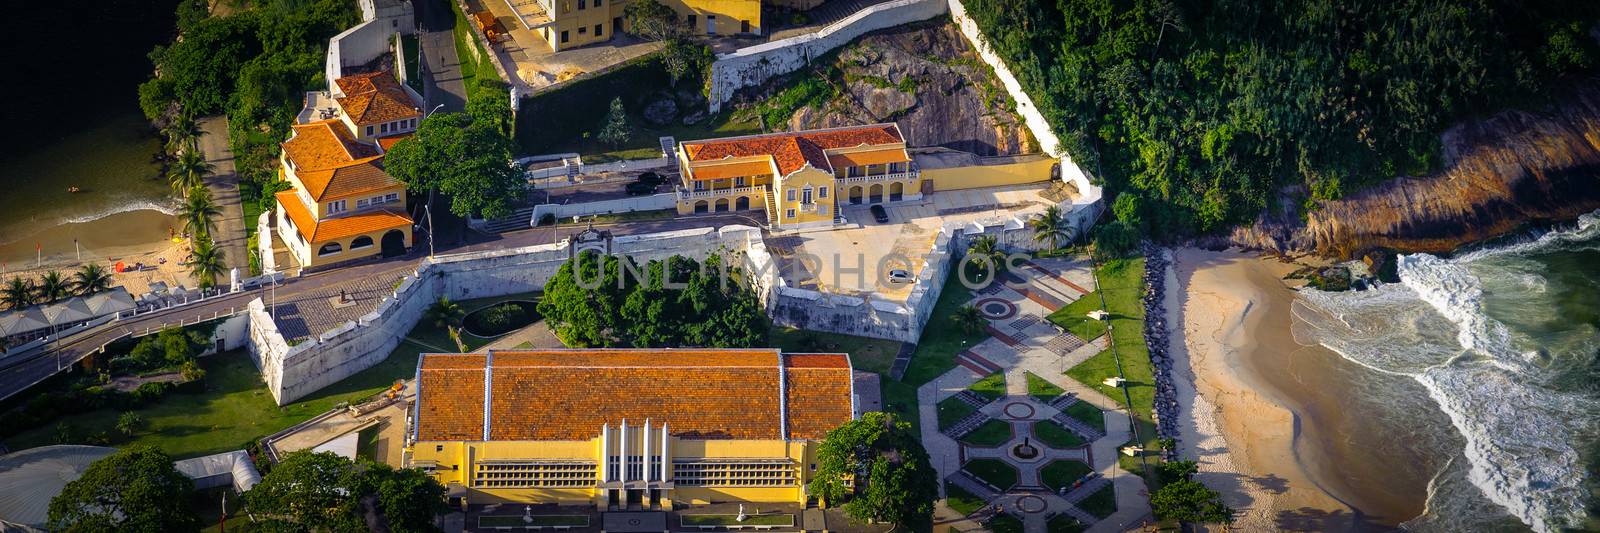 Aerial view of a fort at the waterfront, Fort of St. John, Guanabara Bay, Rio De Janeiro, Brazil